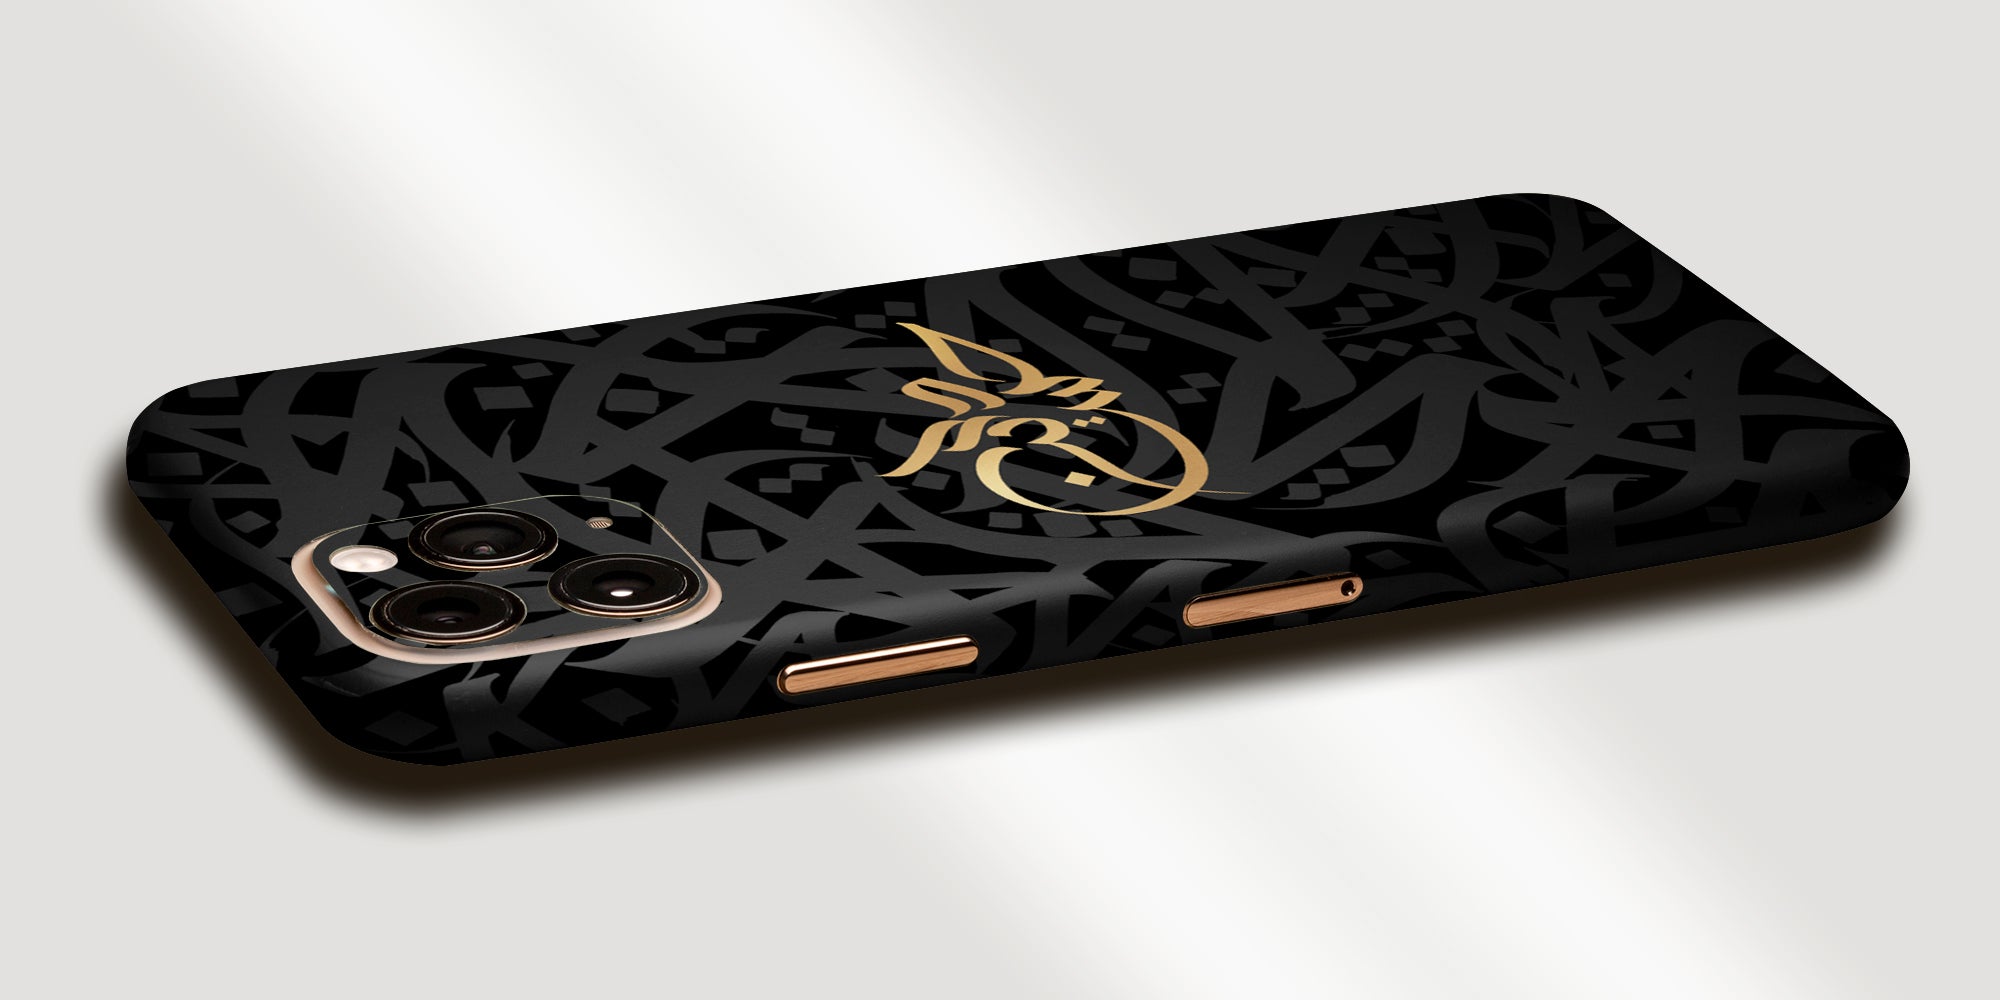 Arabic Calligraphy by Zaman Decal Skin With Personalised Name Phone Wrap - Black / Gold